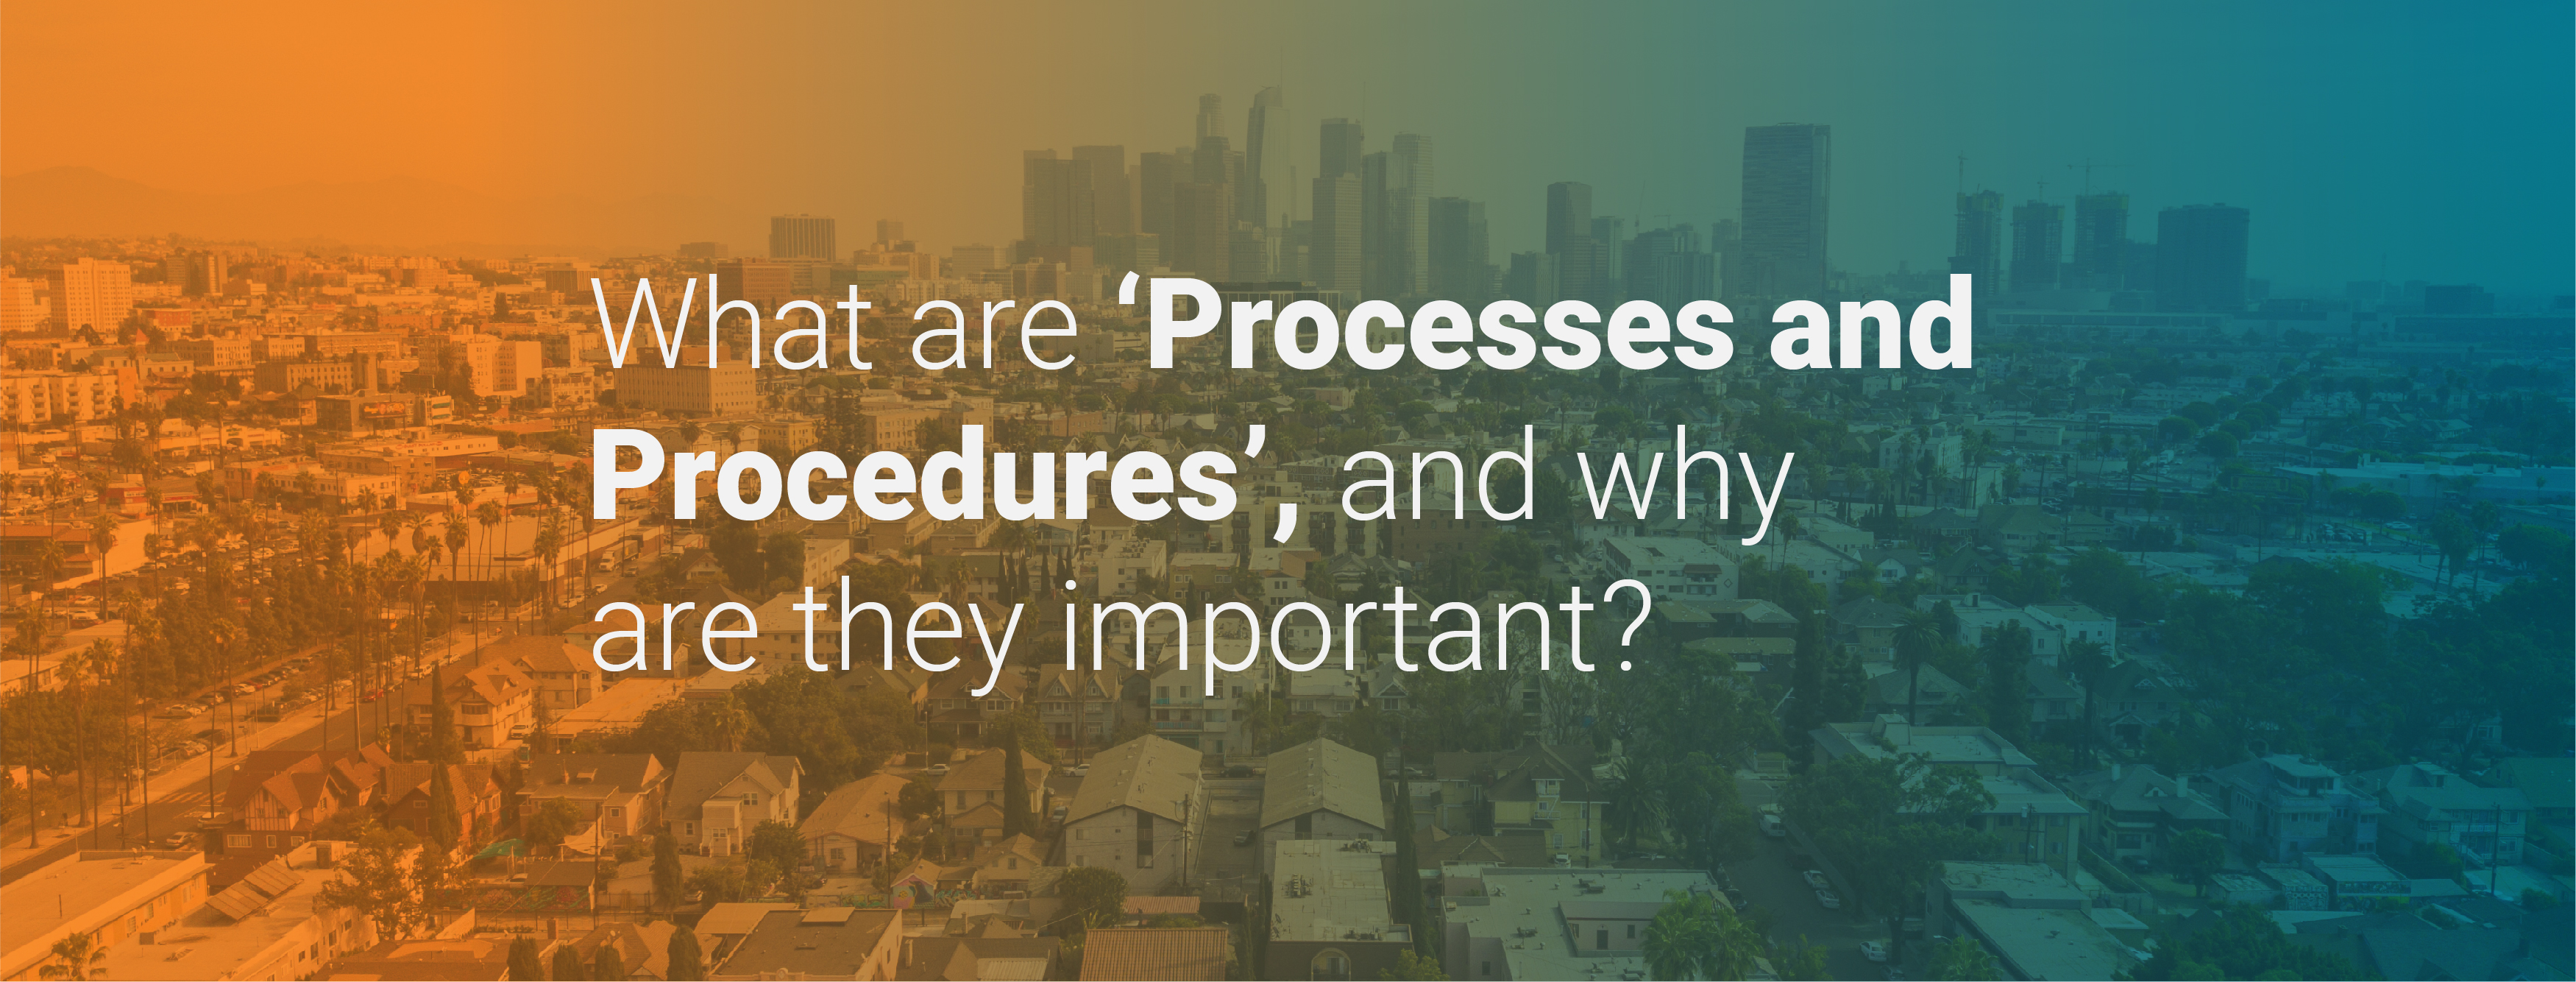 What Are 'Processes and Procedures', and Why Are They Important?